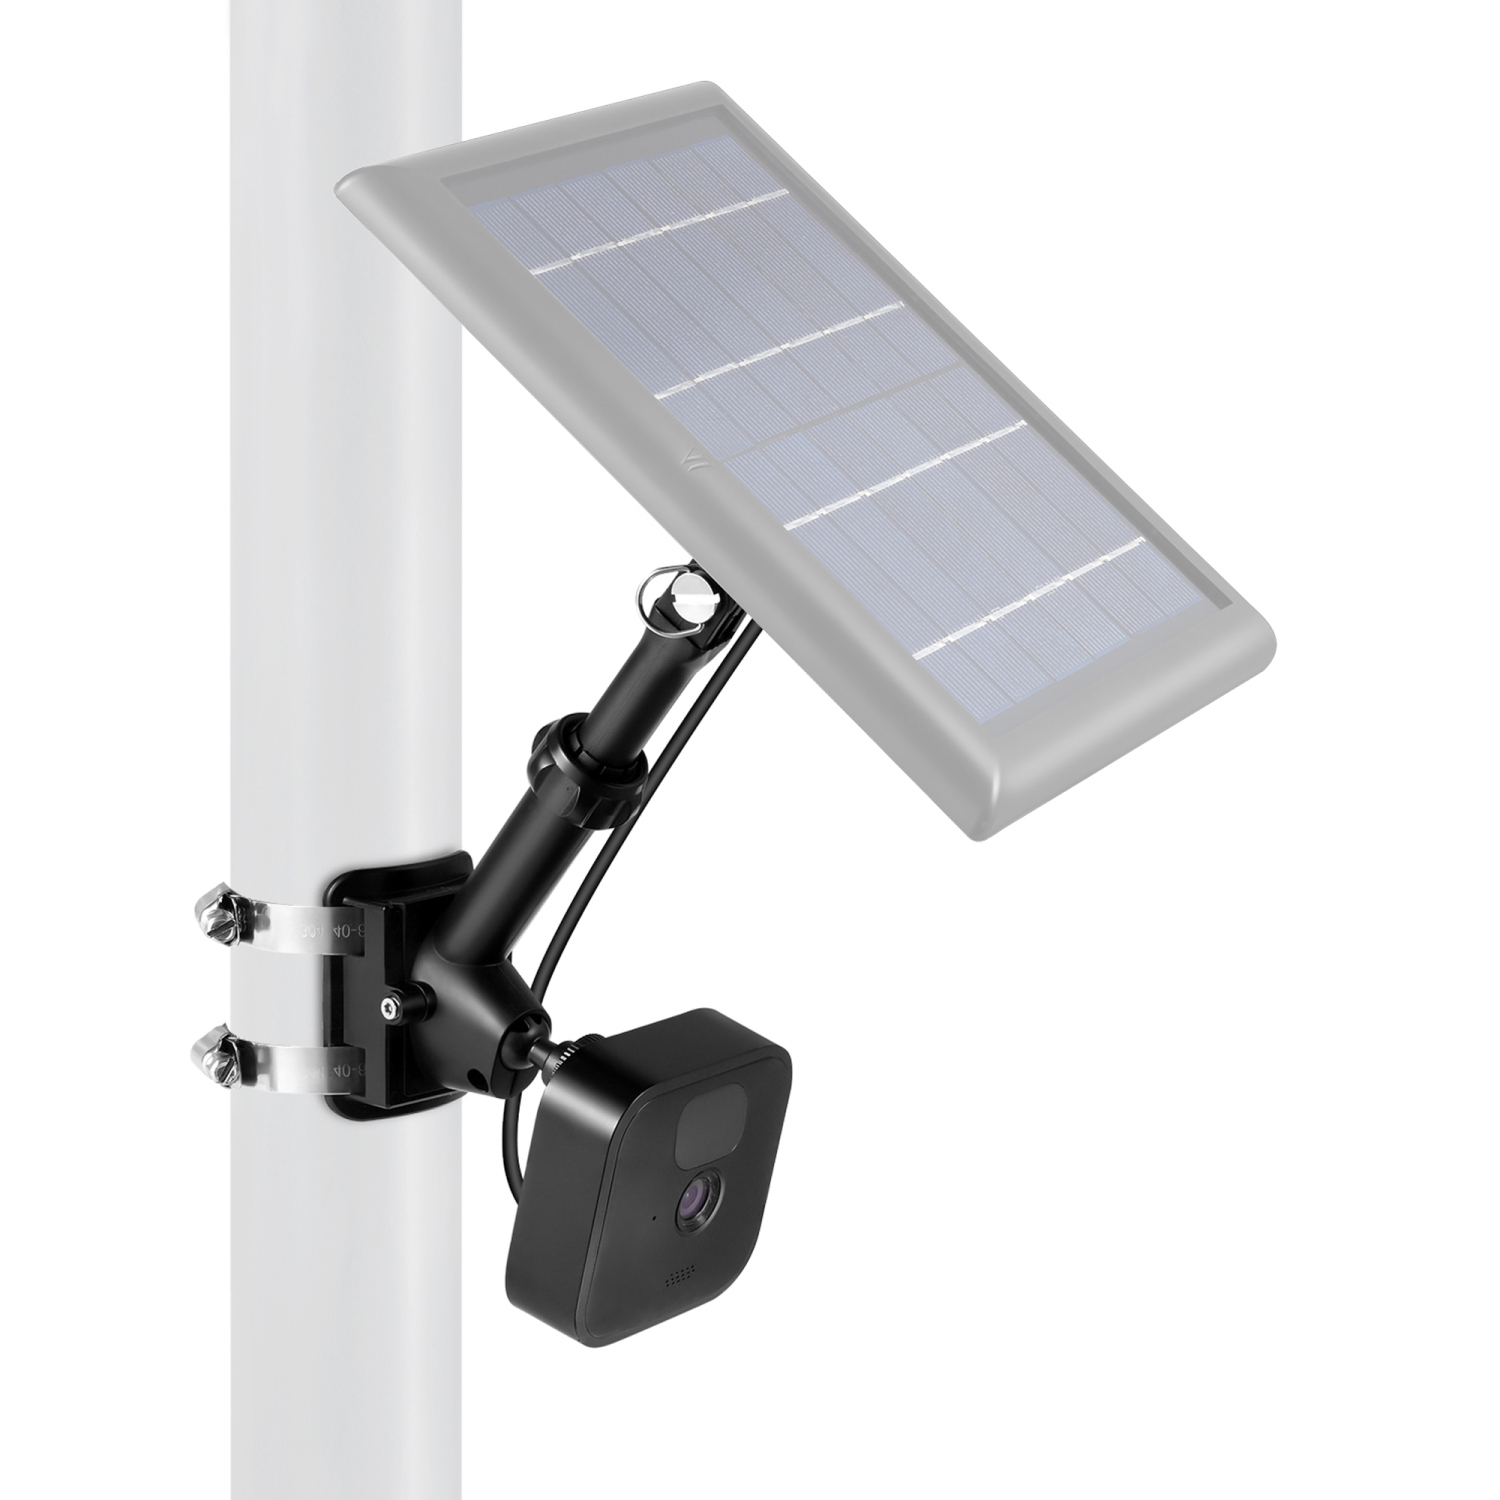 Wasserstein 2-in-1 Universal Pole Mount for Camera & Solar Panel Compatible with Wyze, Blink, Ring, Arlo, Eufy Camera (Black)